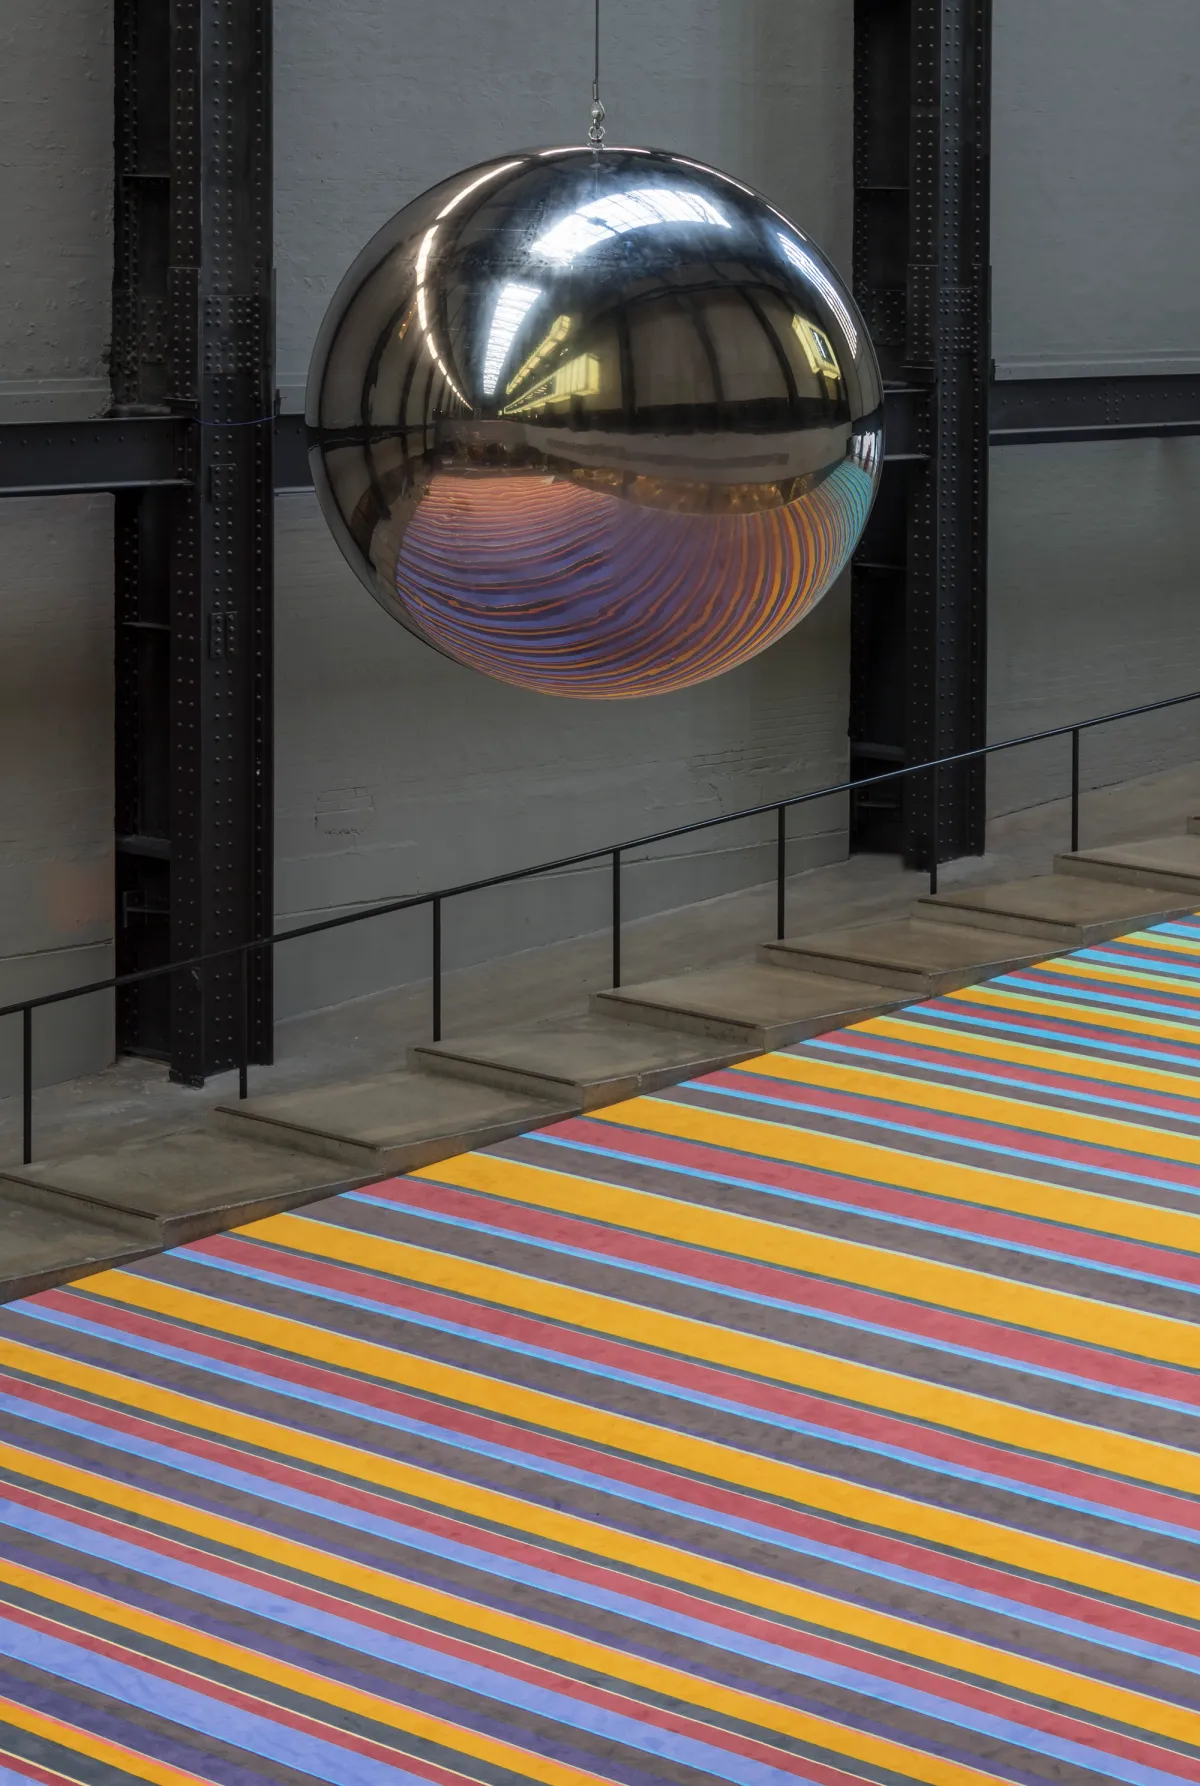 A large sphere hangs above a floor featuring a design of multicolored lines.